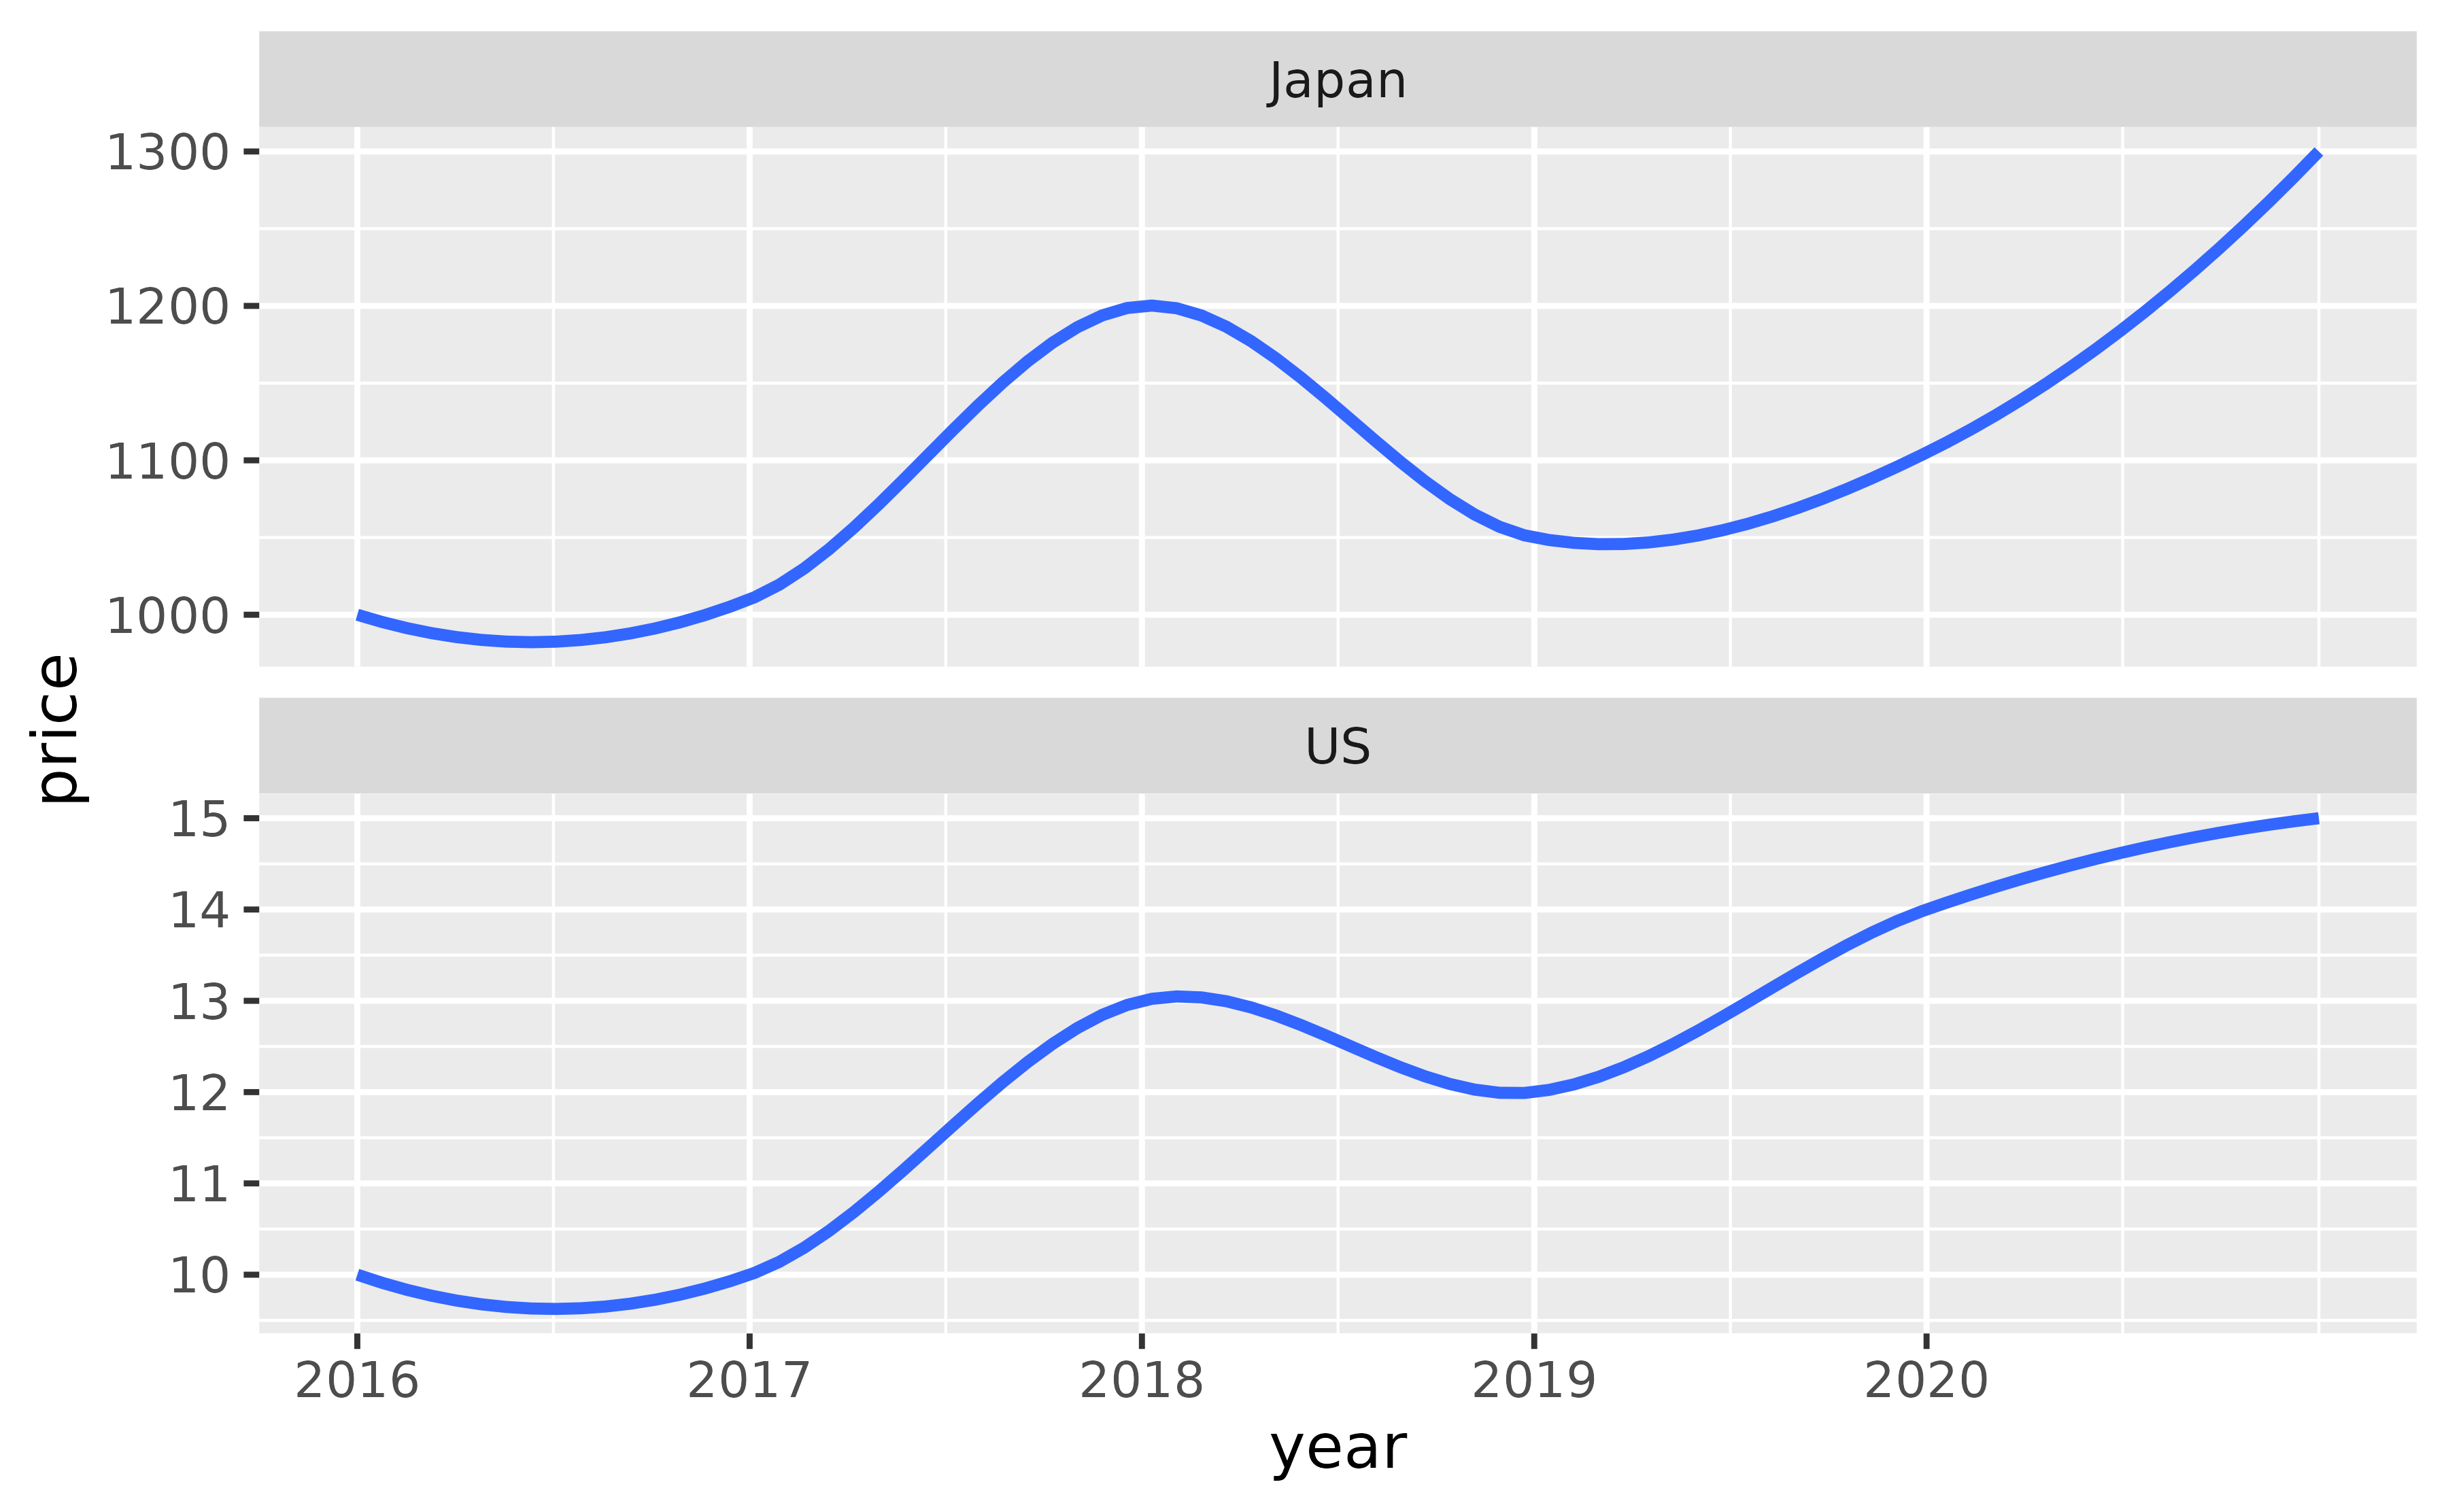 A timeseries plot showing price over time for two countries, Japan and the US, in two panels in a 2-row, 1-column layout. The countries are indicated at the top of each panel. The two y-axes have different ranges.